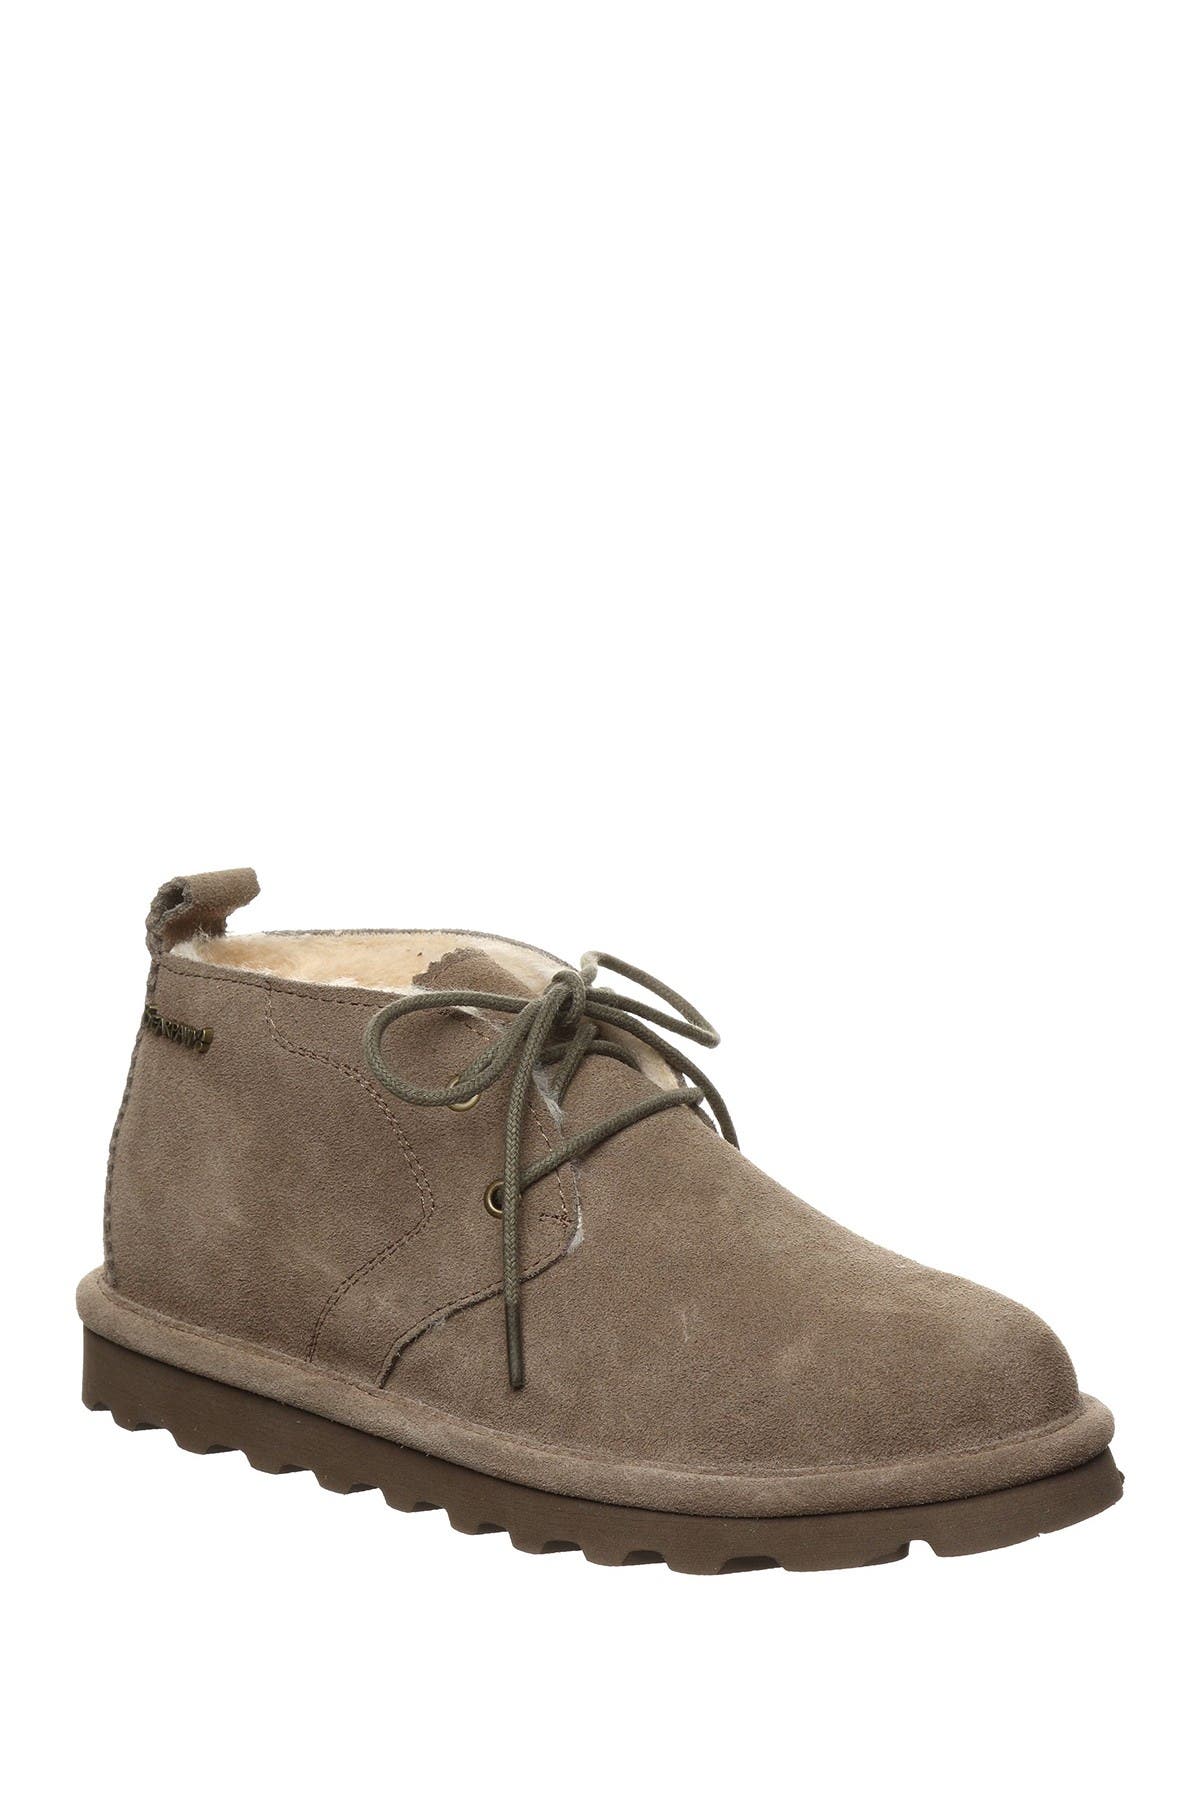 sheep wool lined boots